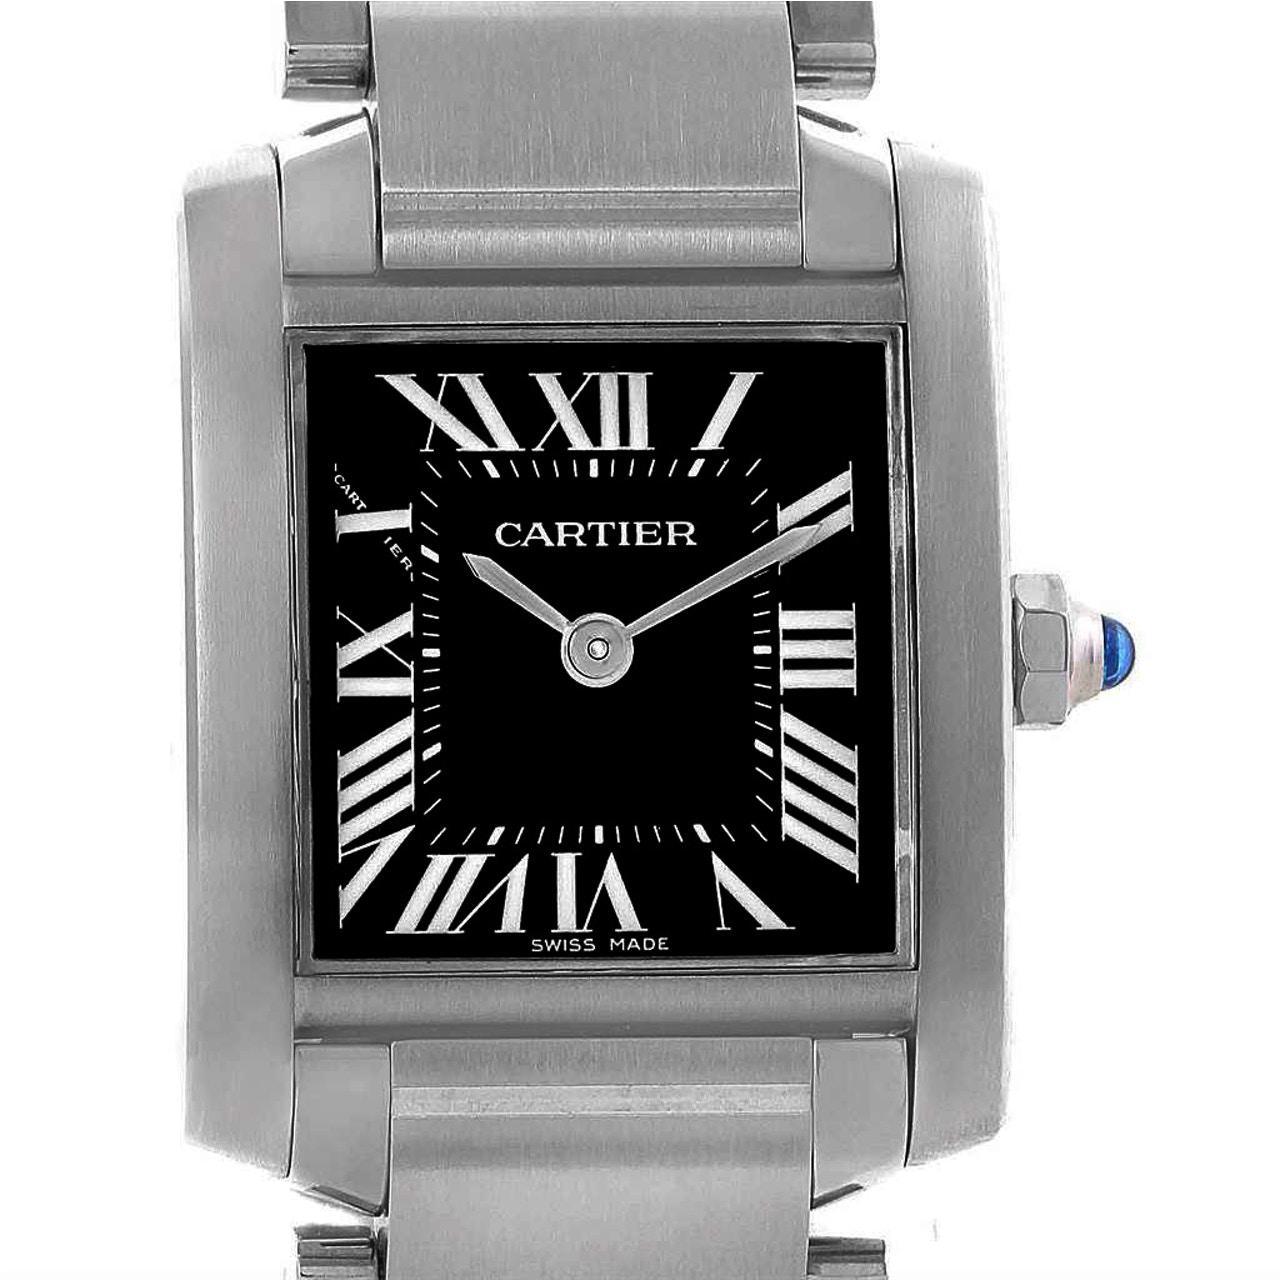 CARTIER TANK FRANCAISE BLACK DIAL WATCH 2384

-Condition: Mint
-Movement: Quartz
-Case size: 20x25mm
-Case thickness: 6mm
-Bezel Material: Stainless Steel
-Dial Color: Black
-Dial Markers: Roman Numerals
-Crystal: Sapphire
-Clasp: Folding

*Comes